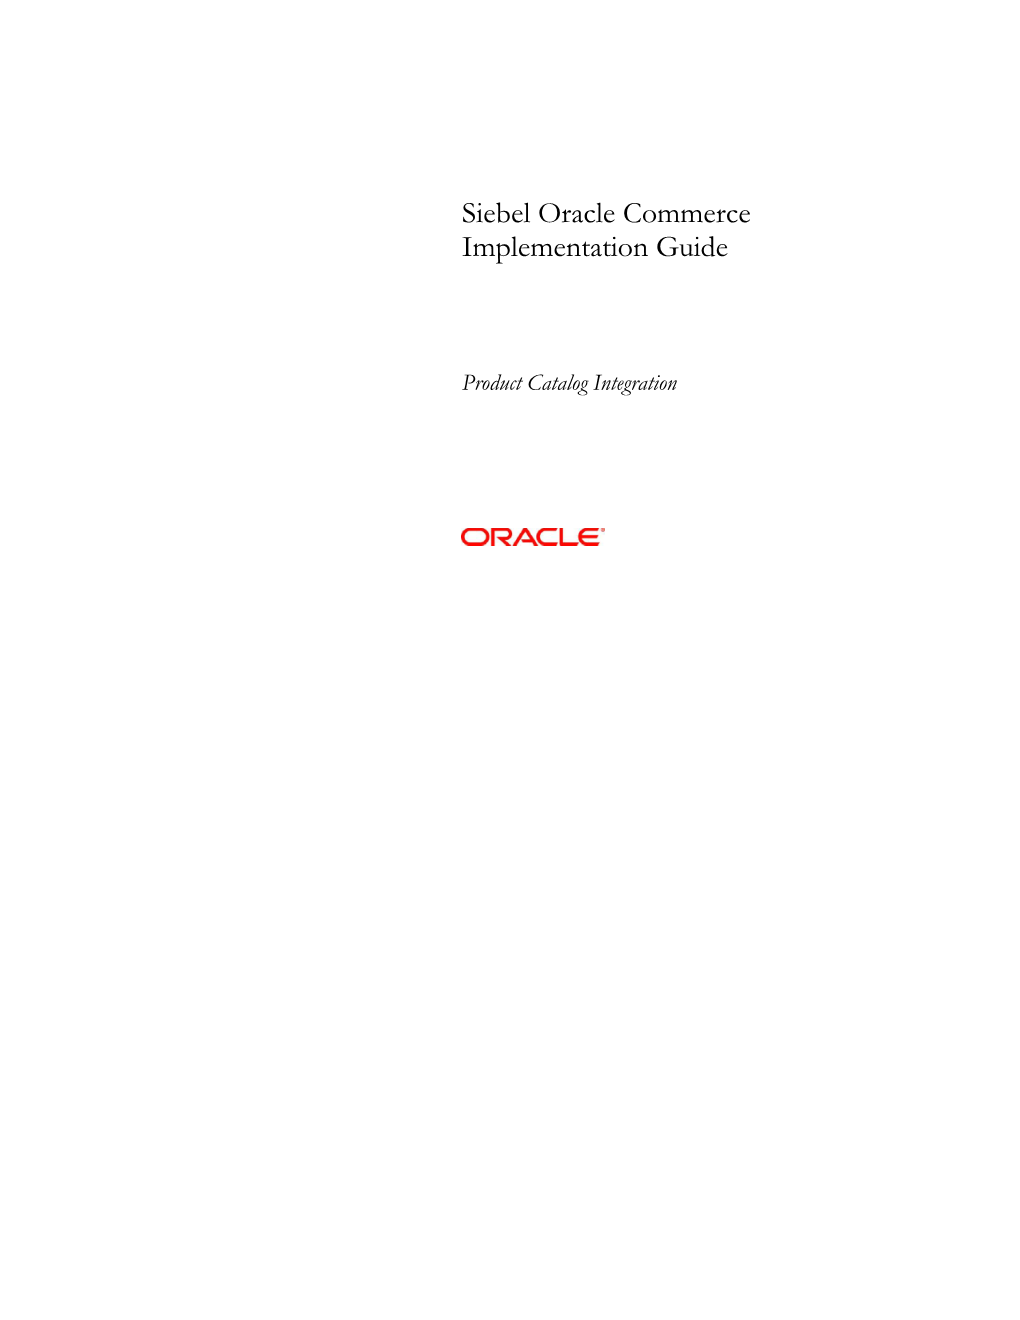 Siebel Oracle Commerce Implementation Guide for Product Catalog Integration